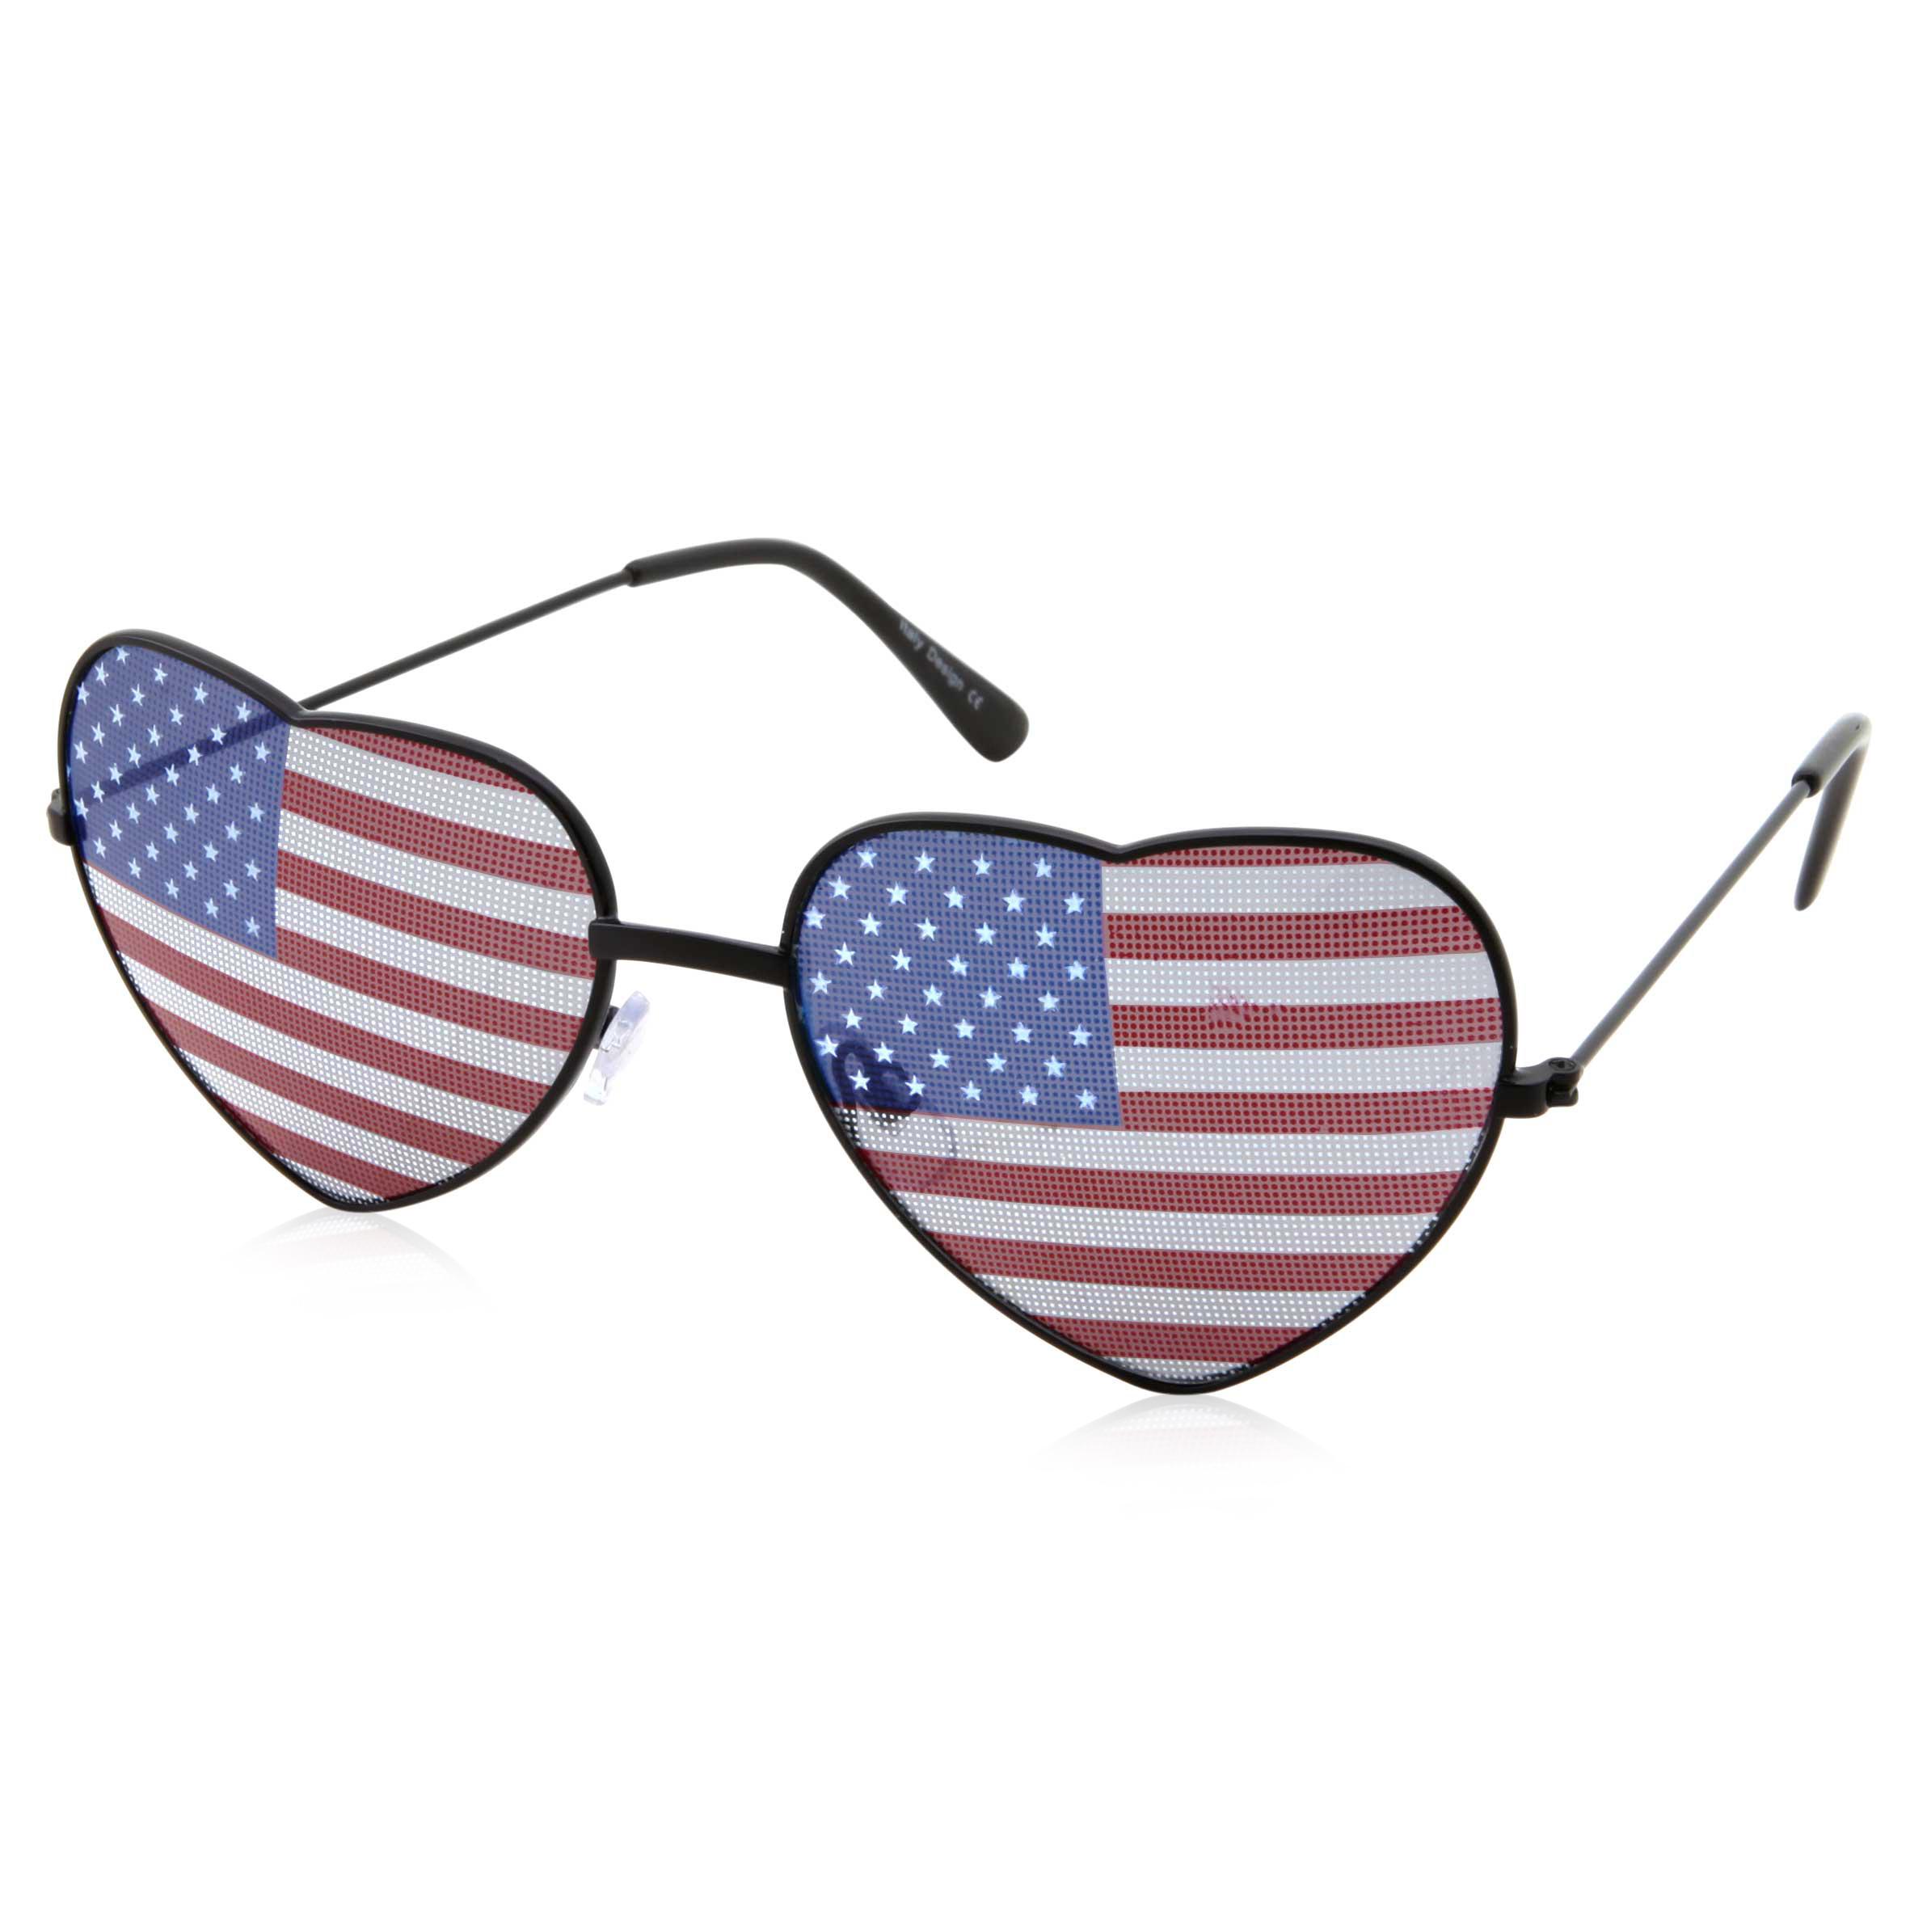 grinderPUNCH Women's Heart Shaped American Flag Cute Sunglasses US Shades - image 2 of 5